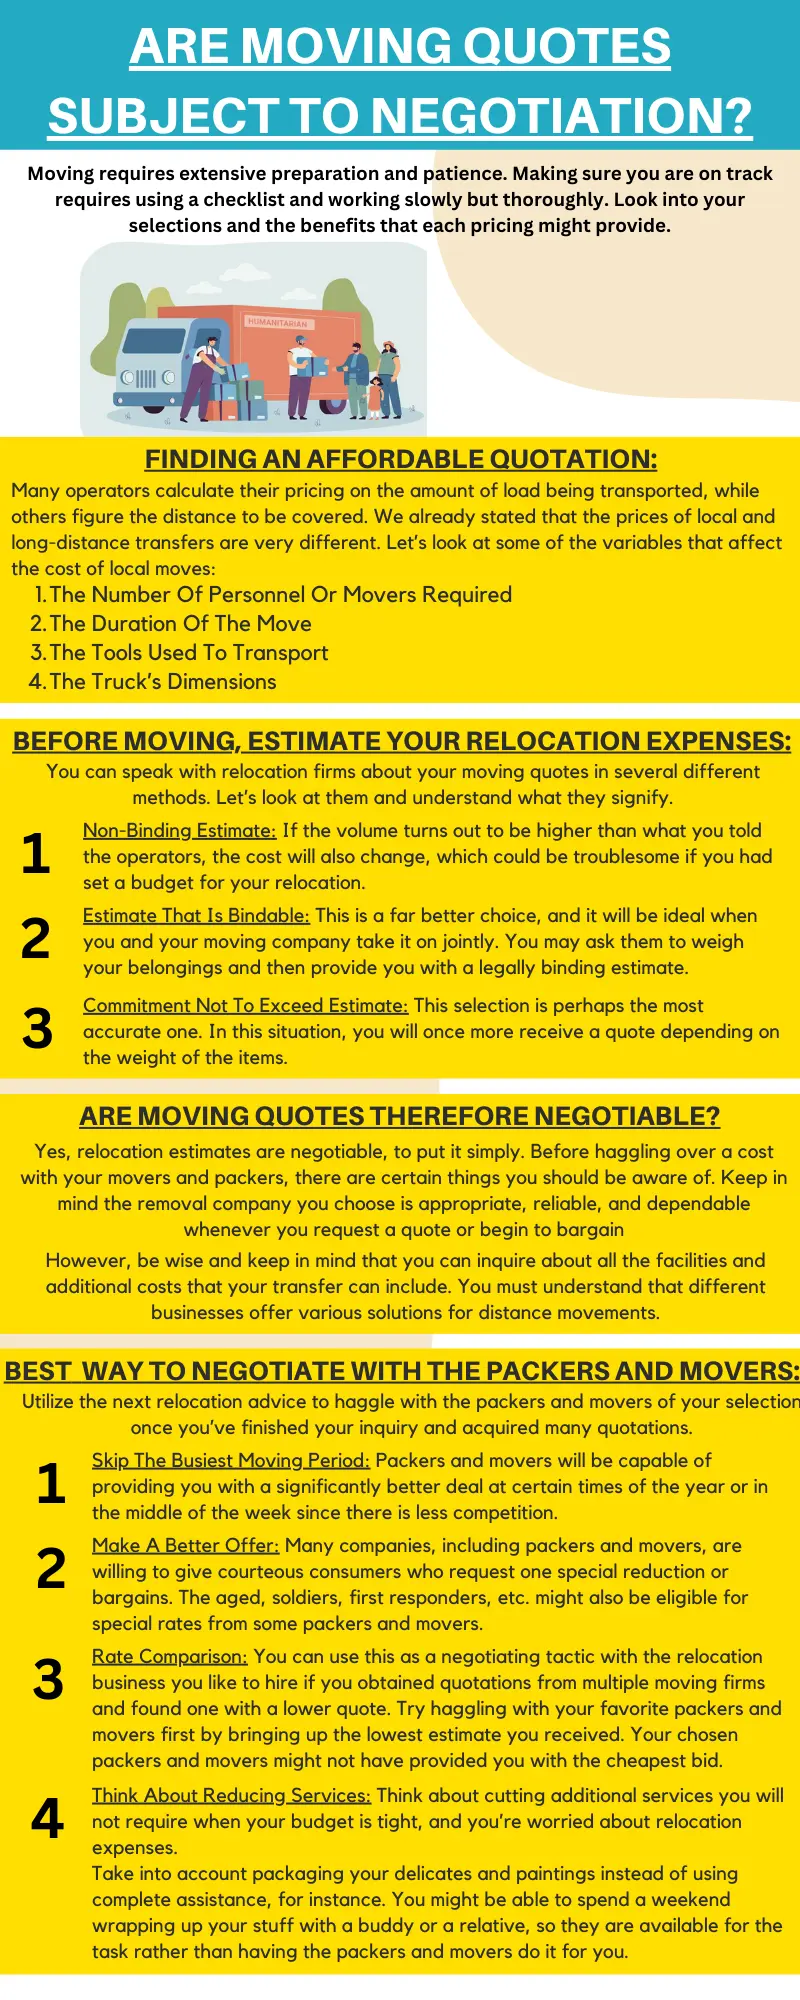 Are Moving Quotes Subject to Negotiation Informational Infographic